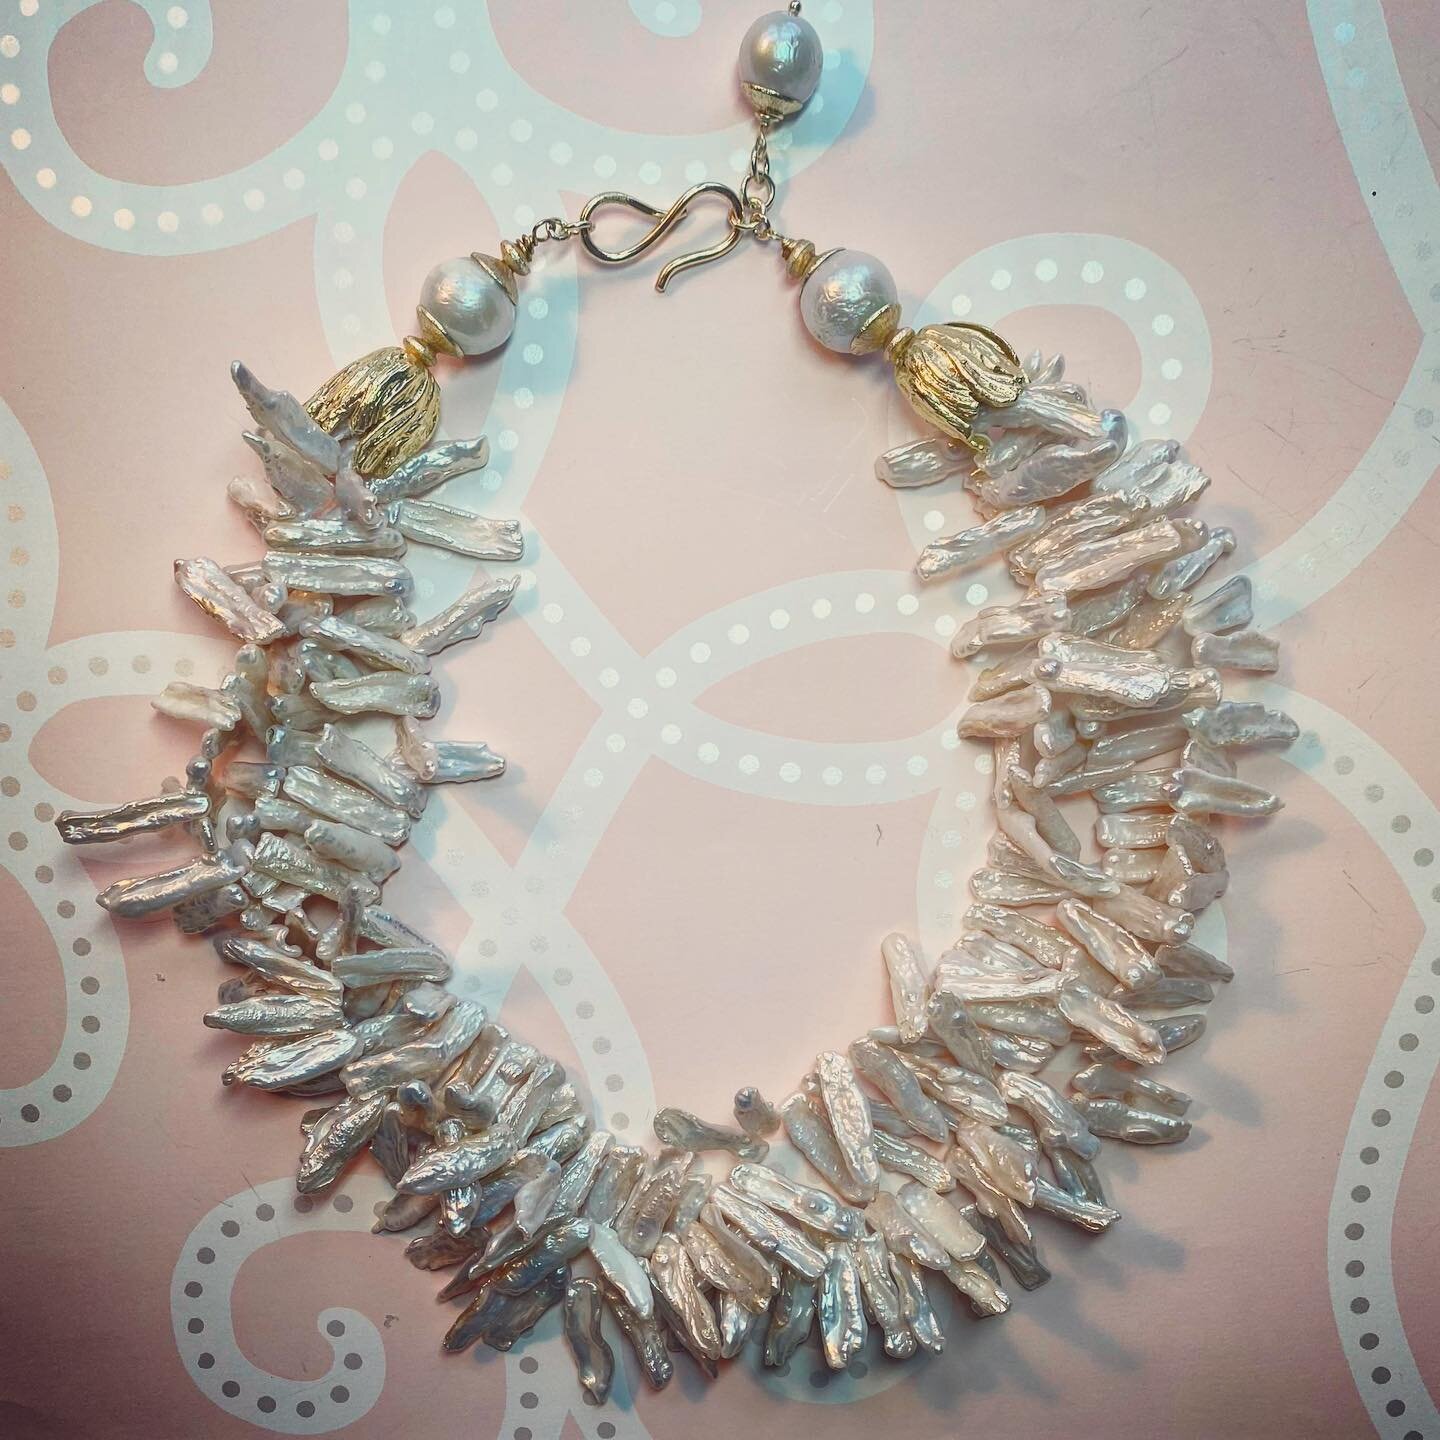 Hope you are outside enjoying this sunny day! This necklace is not your grandmothers pearls but a modern beauty crafted with lovey matchstick pearls. Available at @alexanderscottinteriors in Charlotte or DM me with questions. #pearlsarealwaysappropri